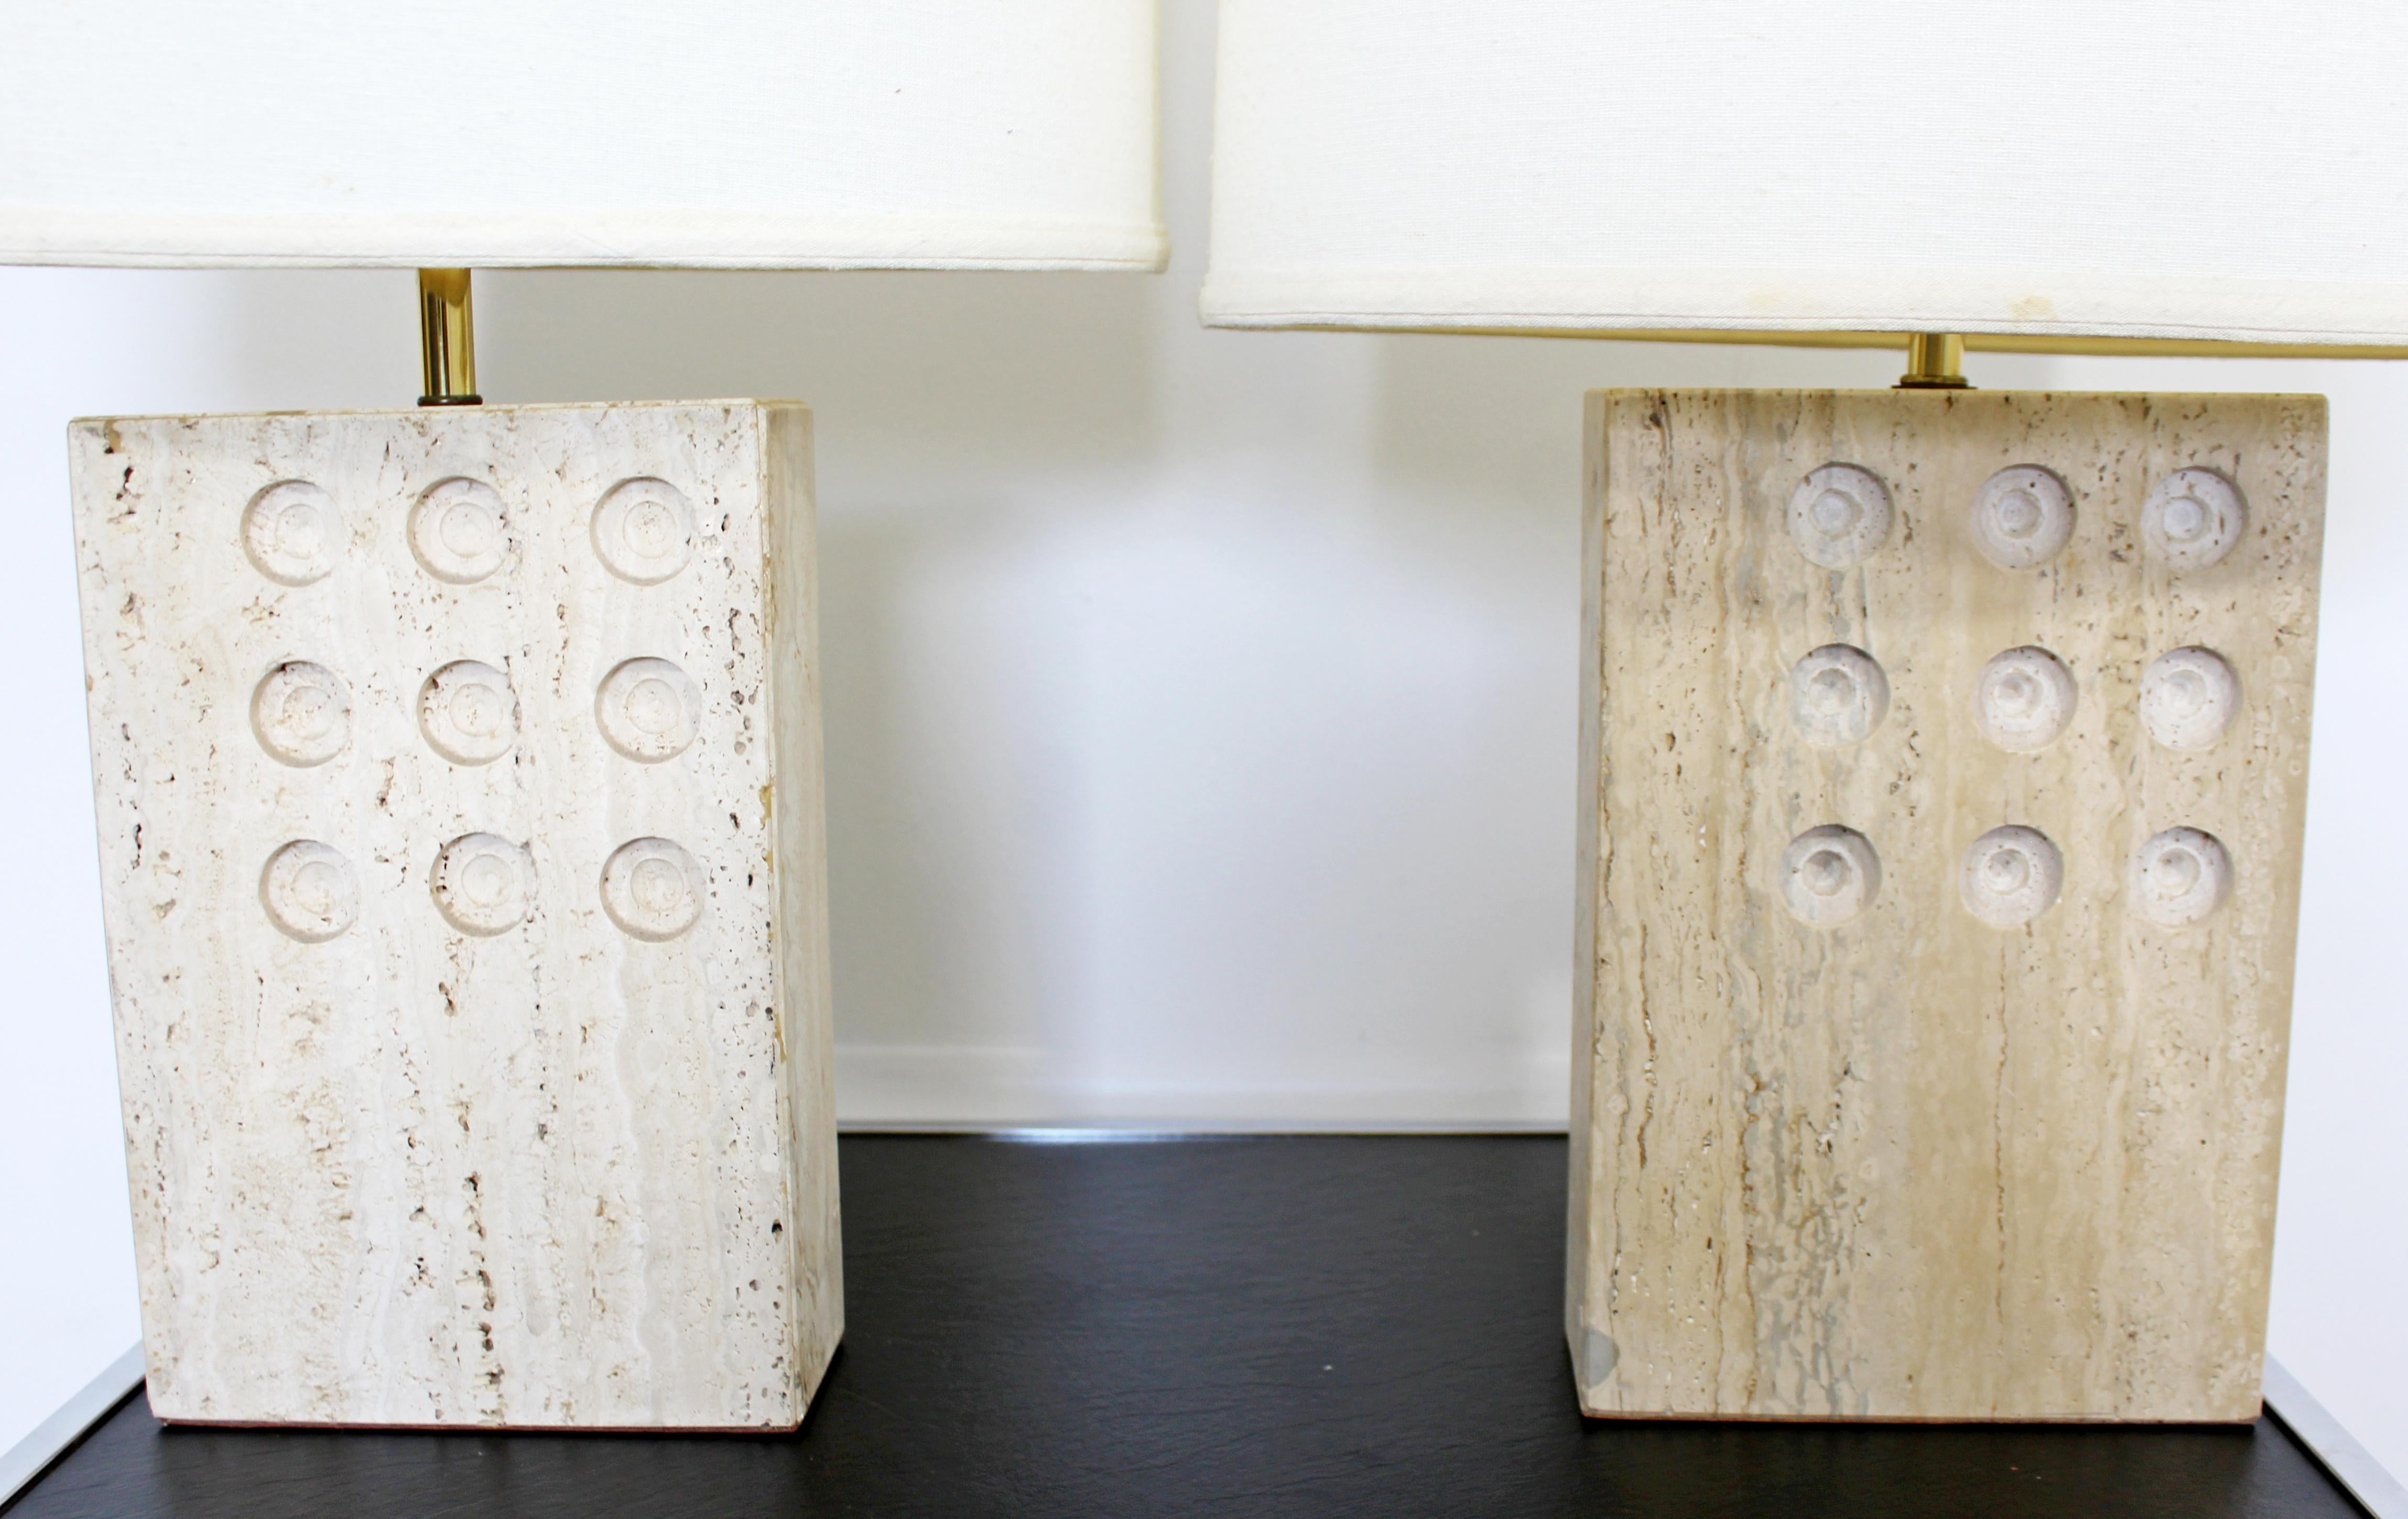 For your consideration is a gorgeous pair of travertine stone table lamps, with their original shades and finials, by Goffredo Reggiani for Raymor, circa 1960s. In excellent vintage condition. The dimensions of the lamps are 8